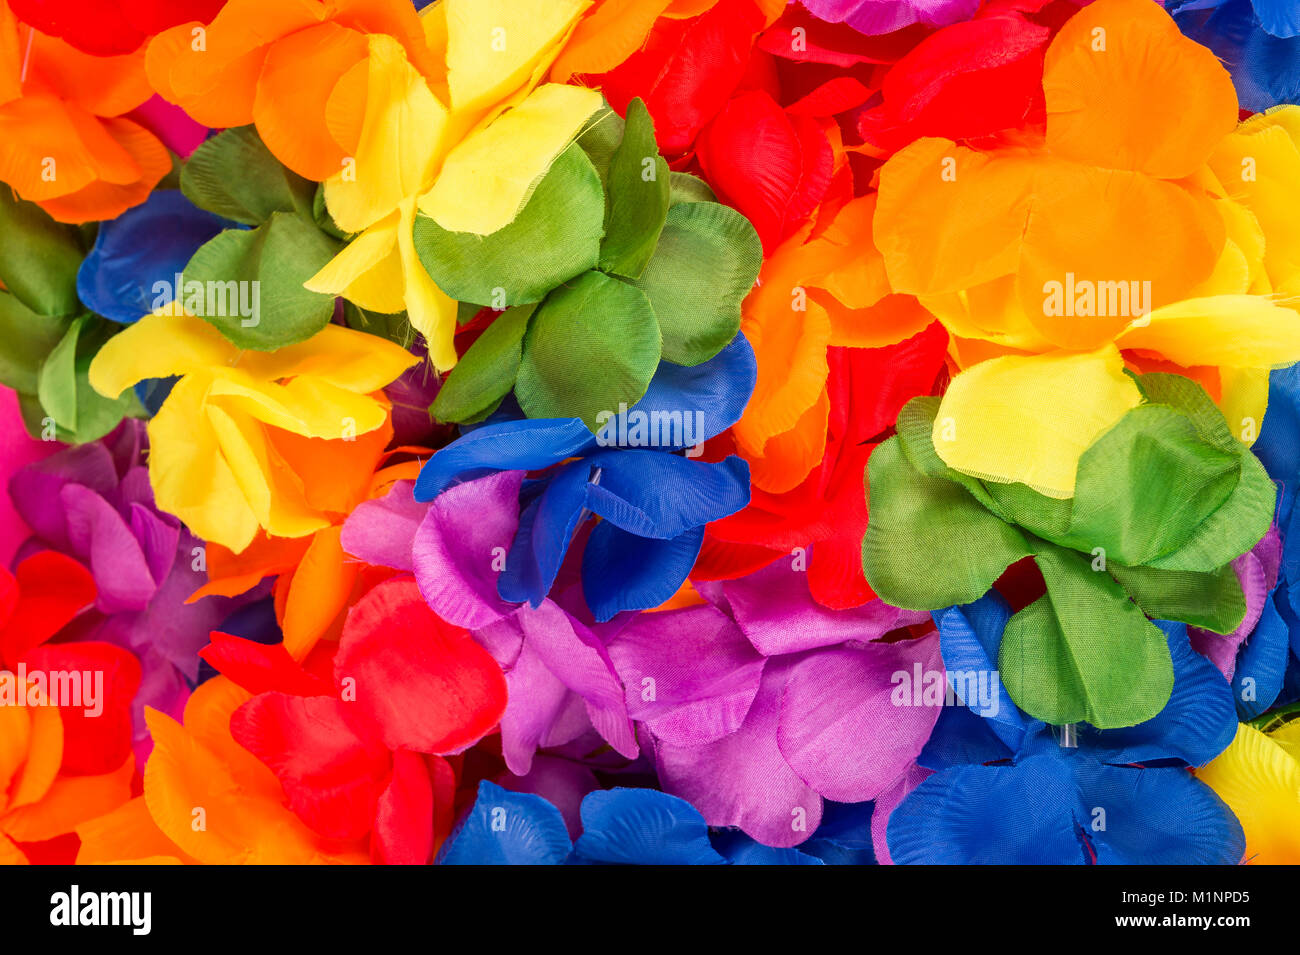 Bright jumble of flower Carnival leis in rainbow colors in a full frame textured background Stock Photo